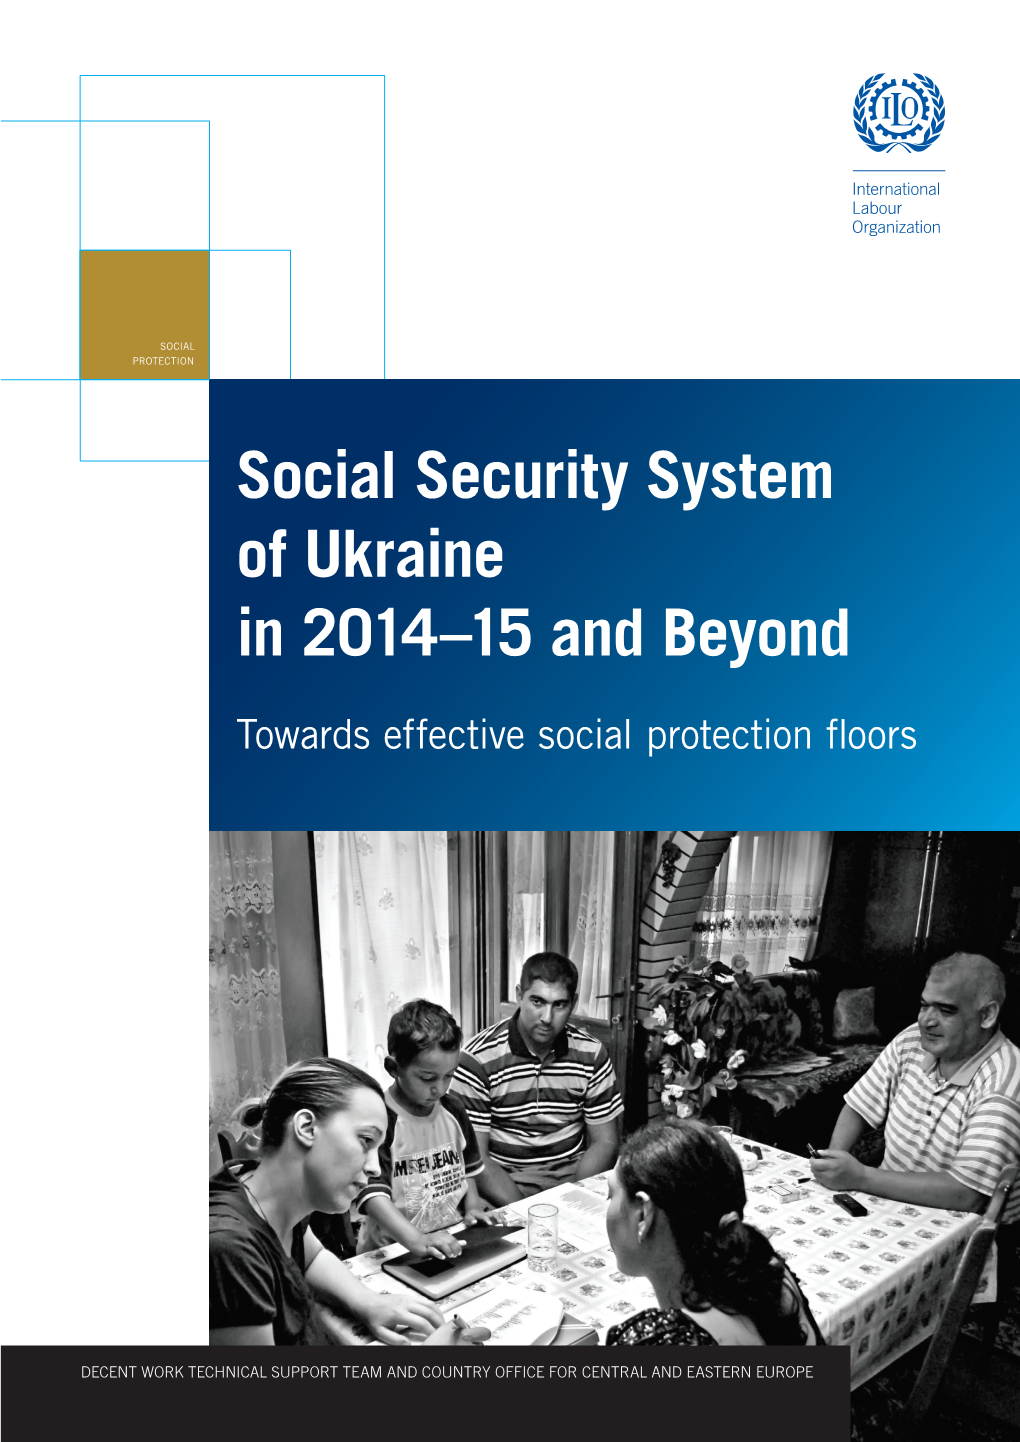 Social Security System of Ukraine in 2014-15 and Beyond-US-Final-WEB2.Indd